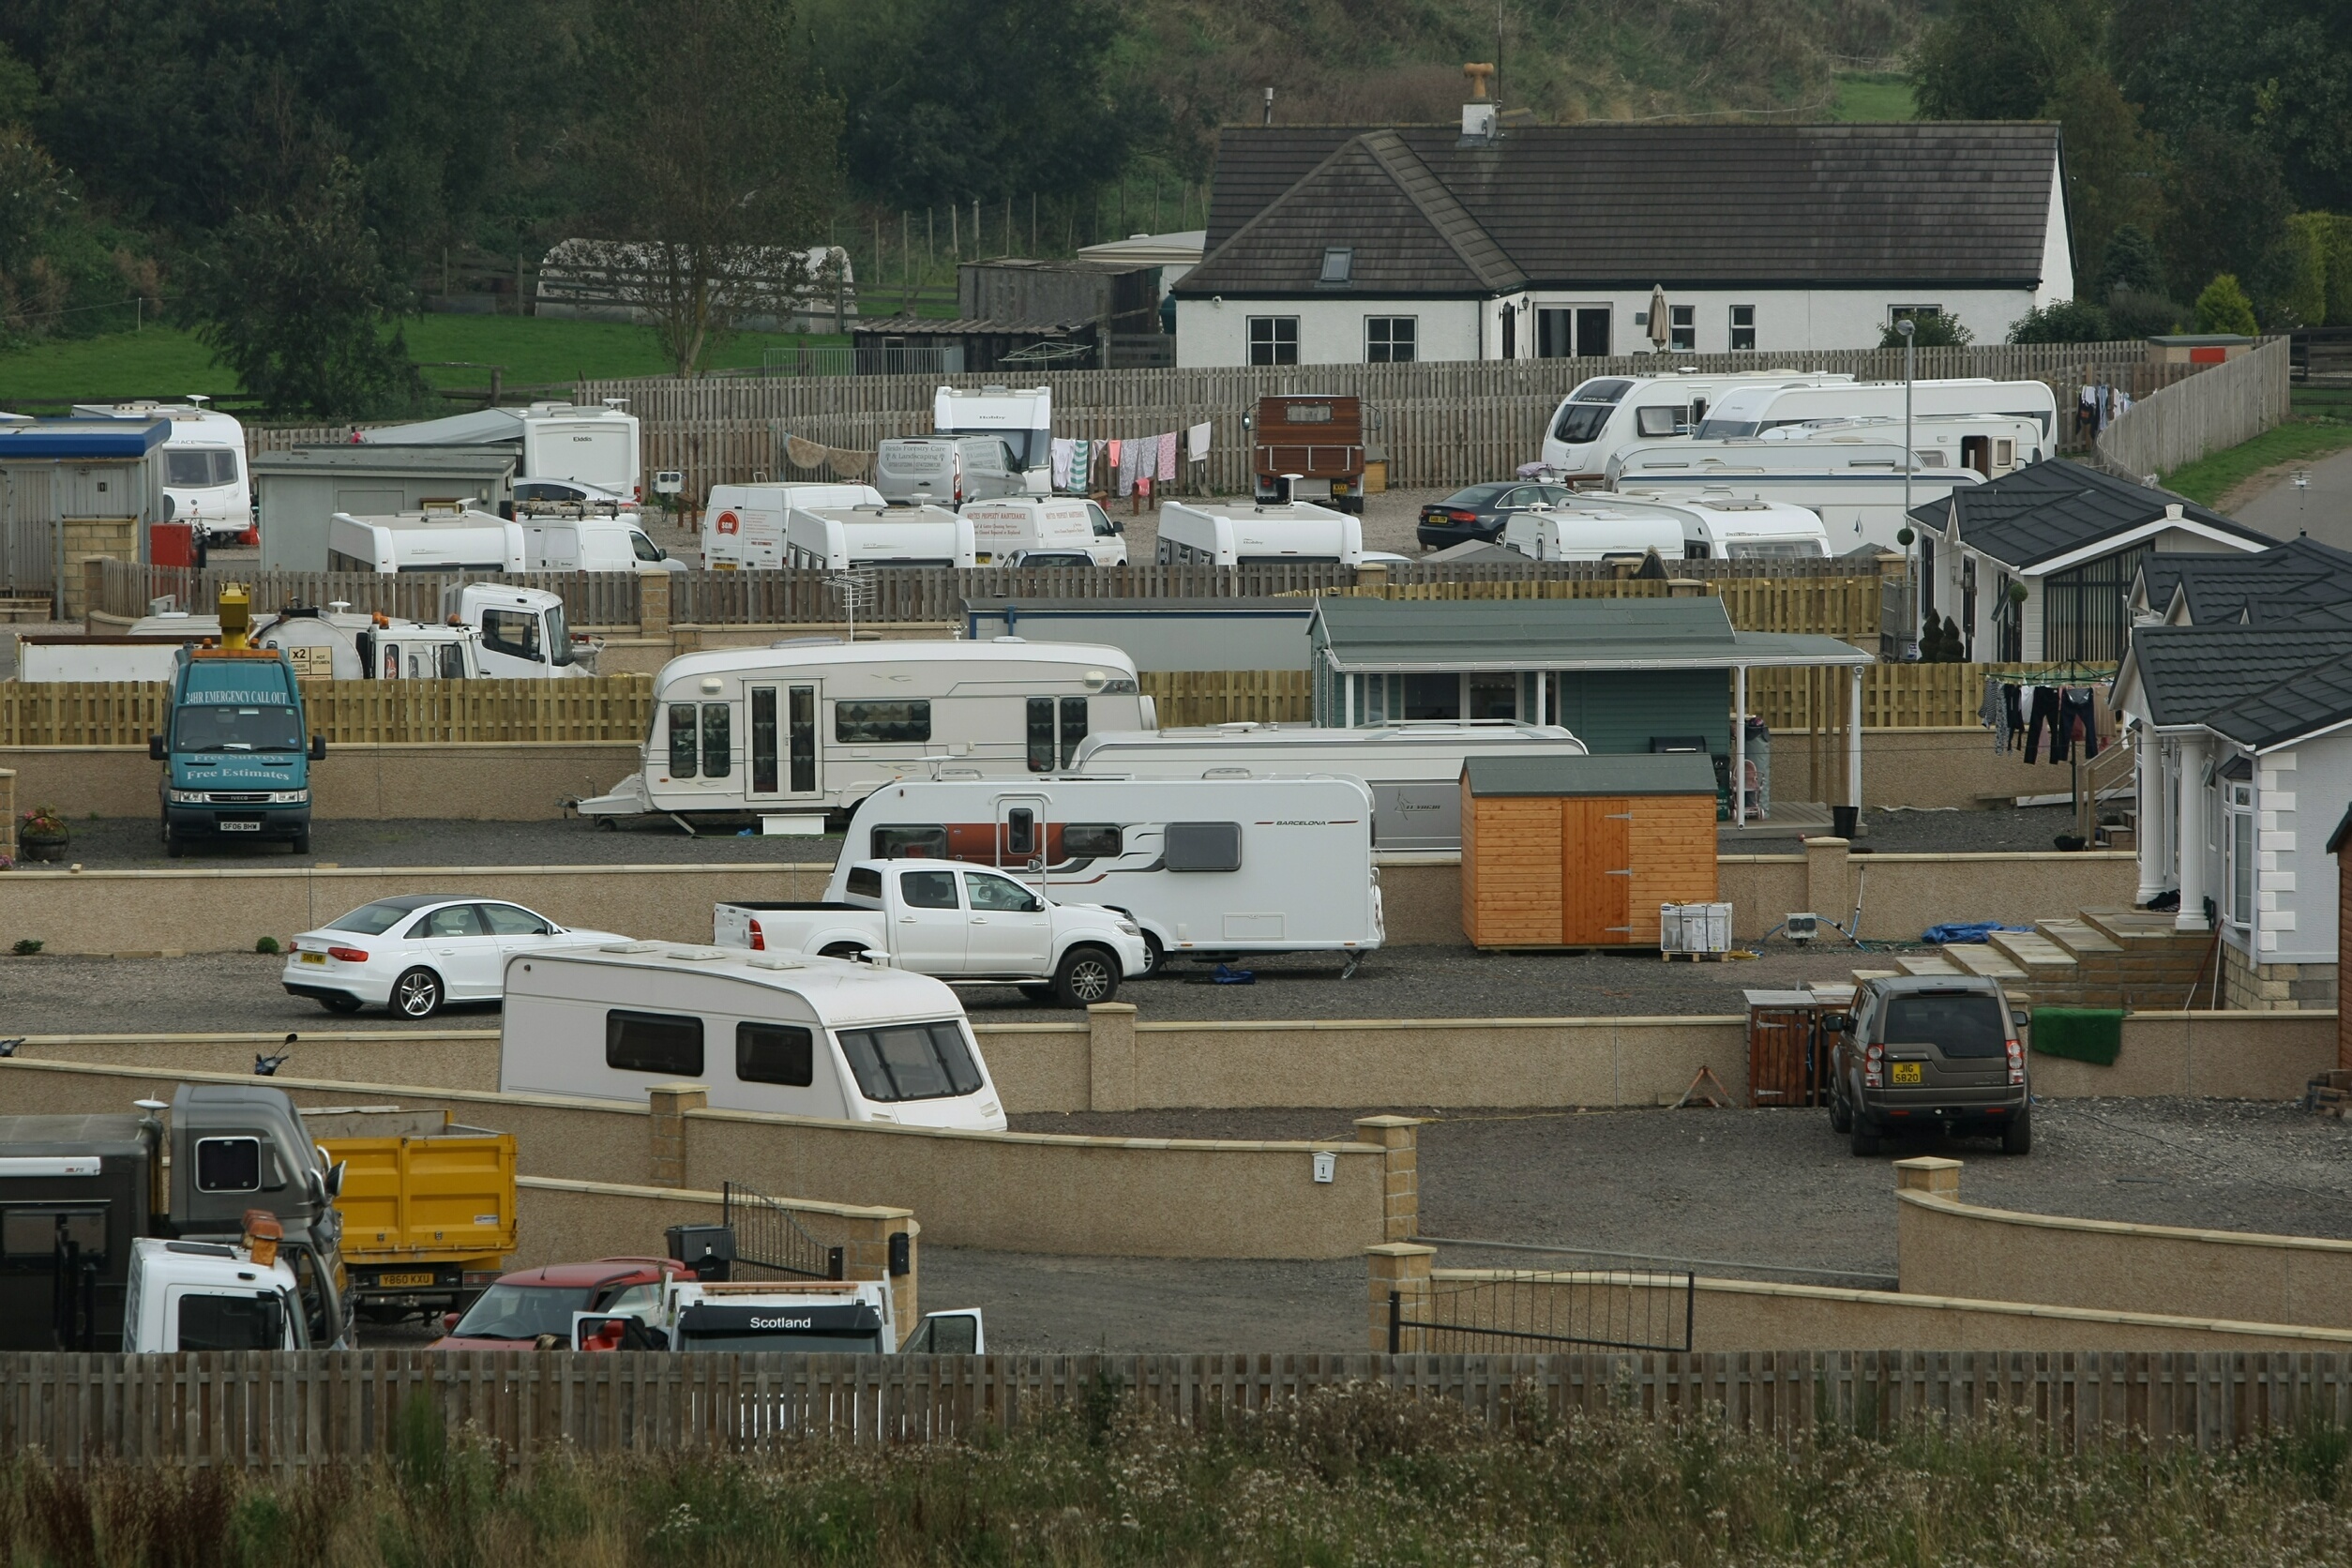 st cyrus travellers site